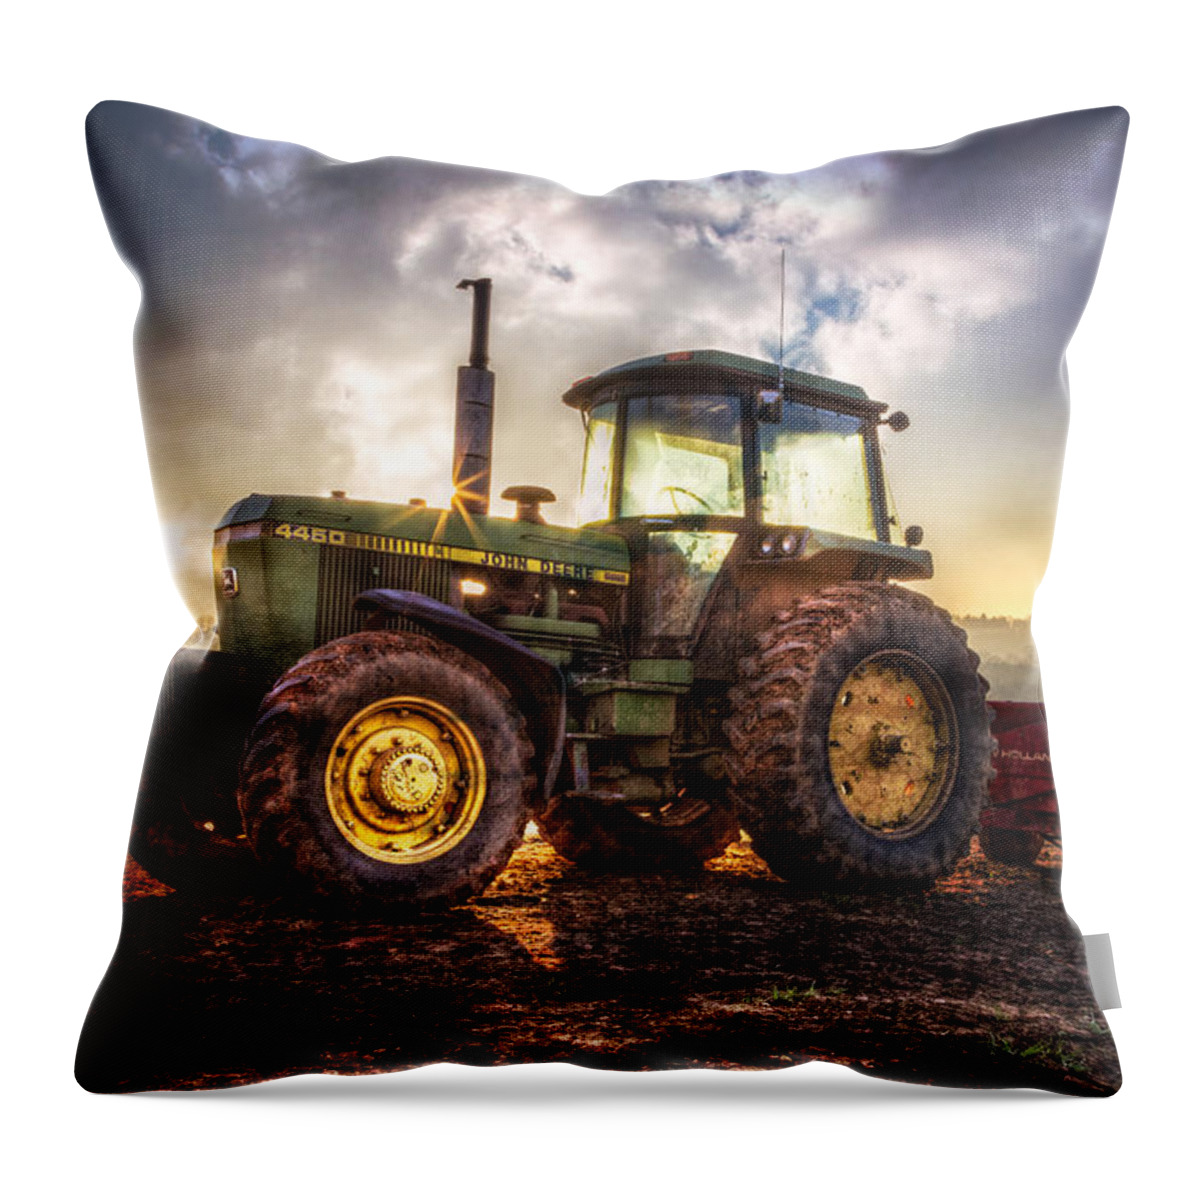 4450 Throw Pillow featuring the photograph Workhorse II by Debra and Dave Vanderlaan